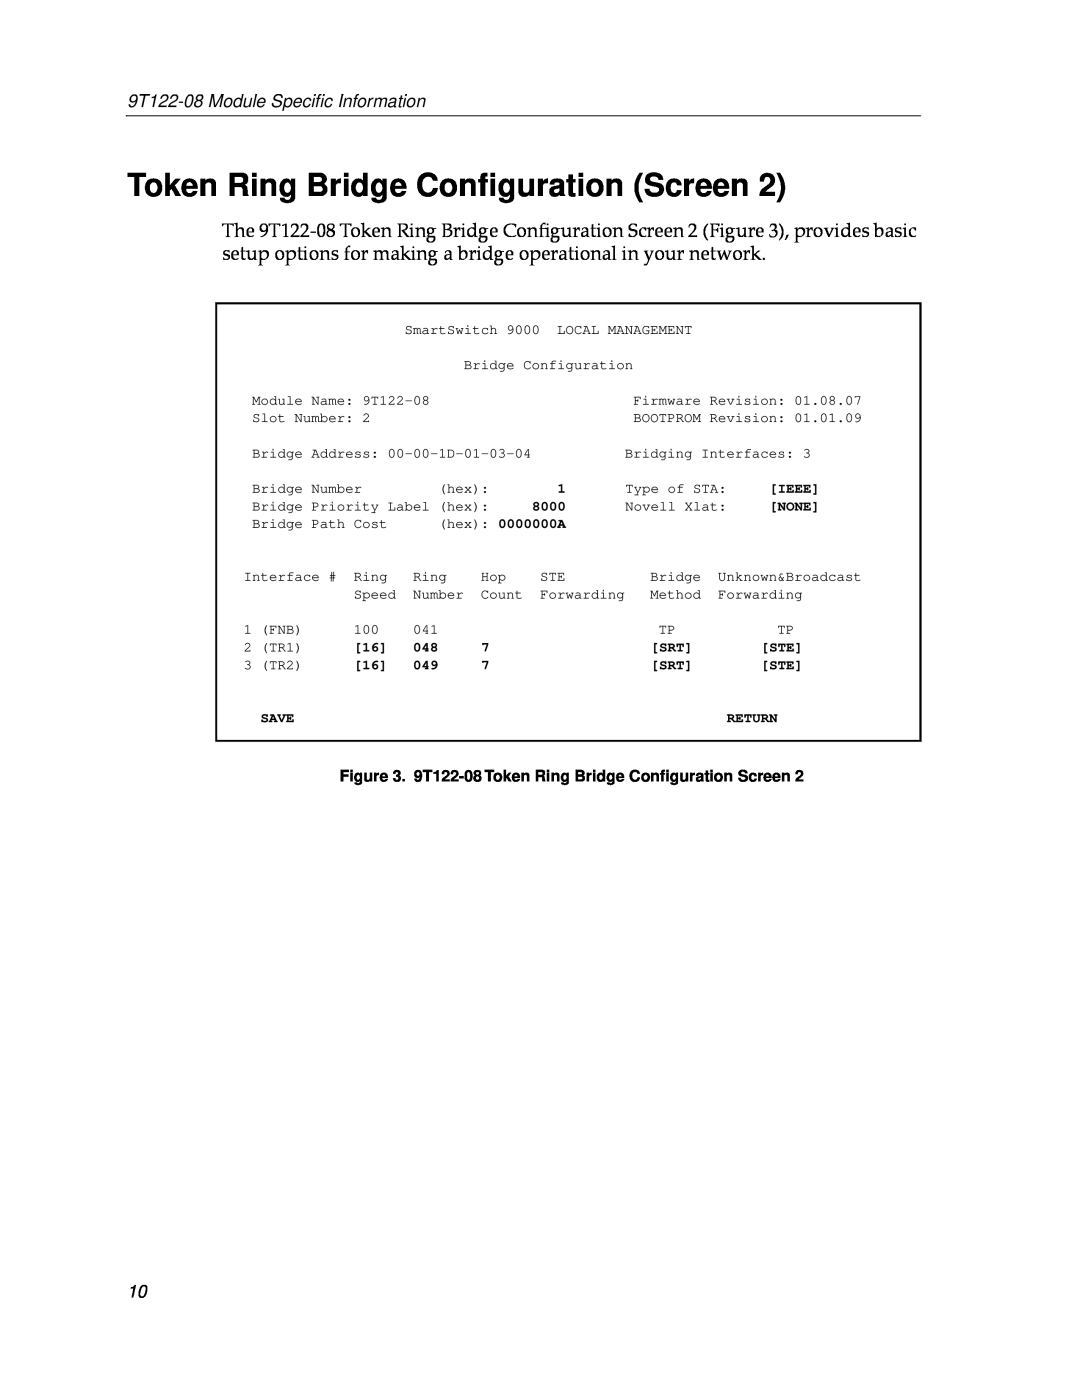 Cabletron Systems Token Ring Bridge Conﬁguration Screen, 9T122-08 Module Speciﬁc Information, Ieee, None, hex 0000000A 